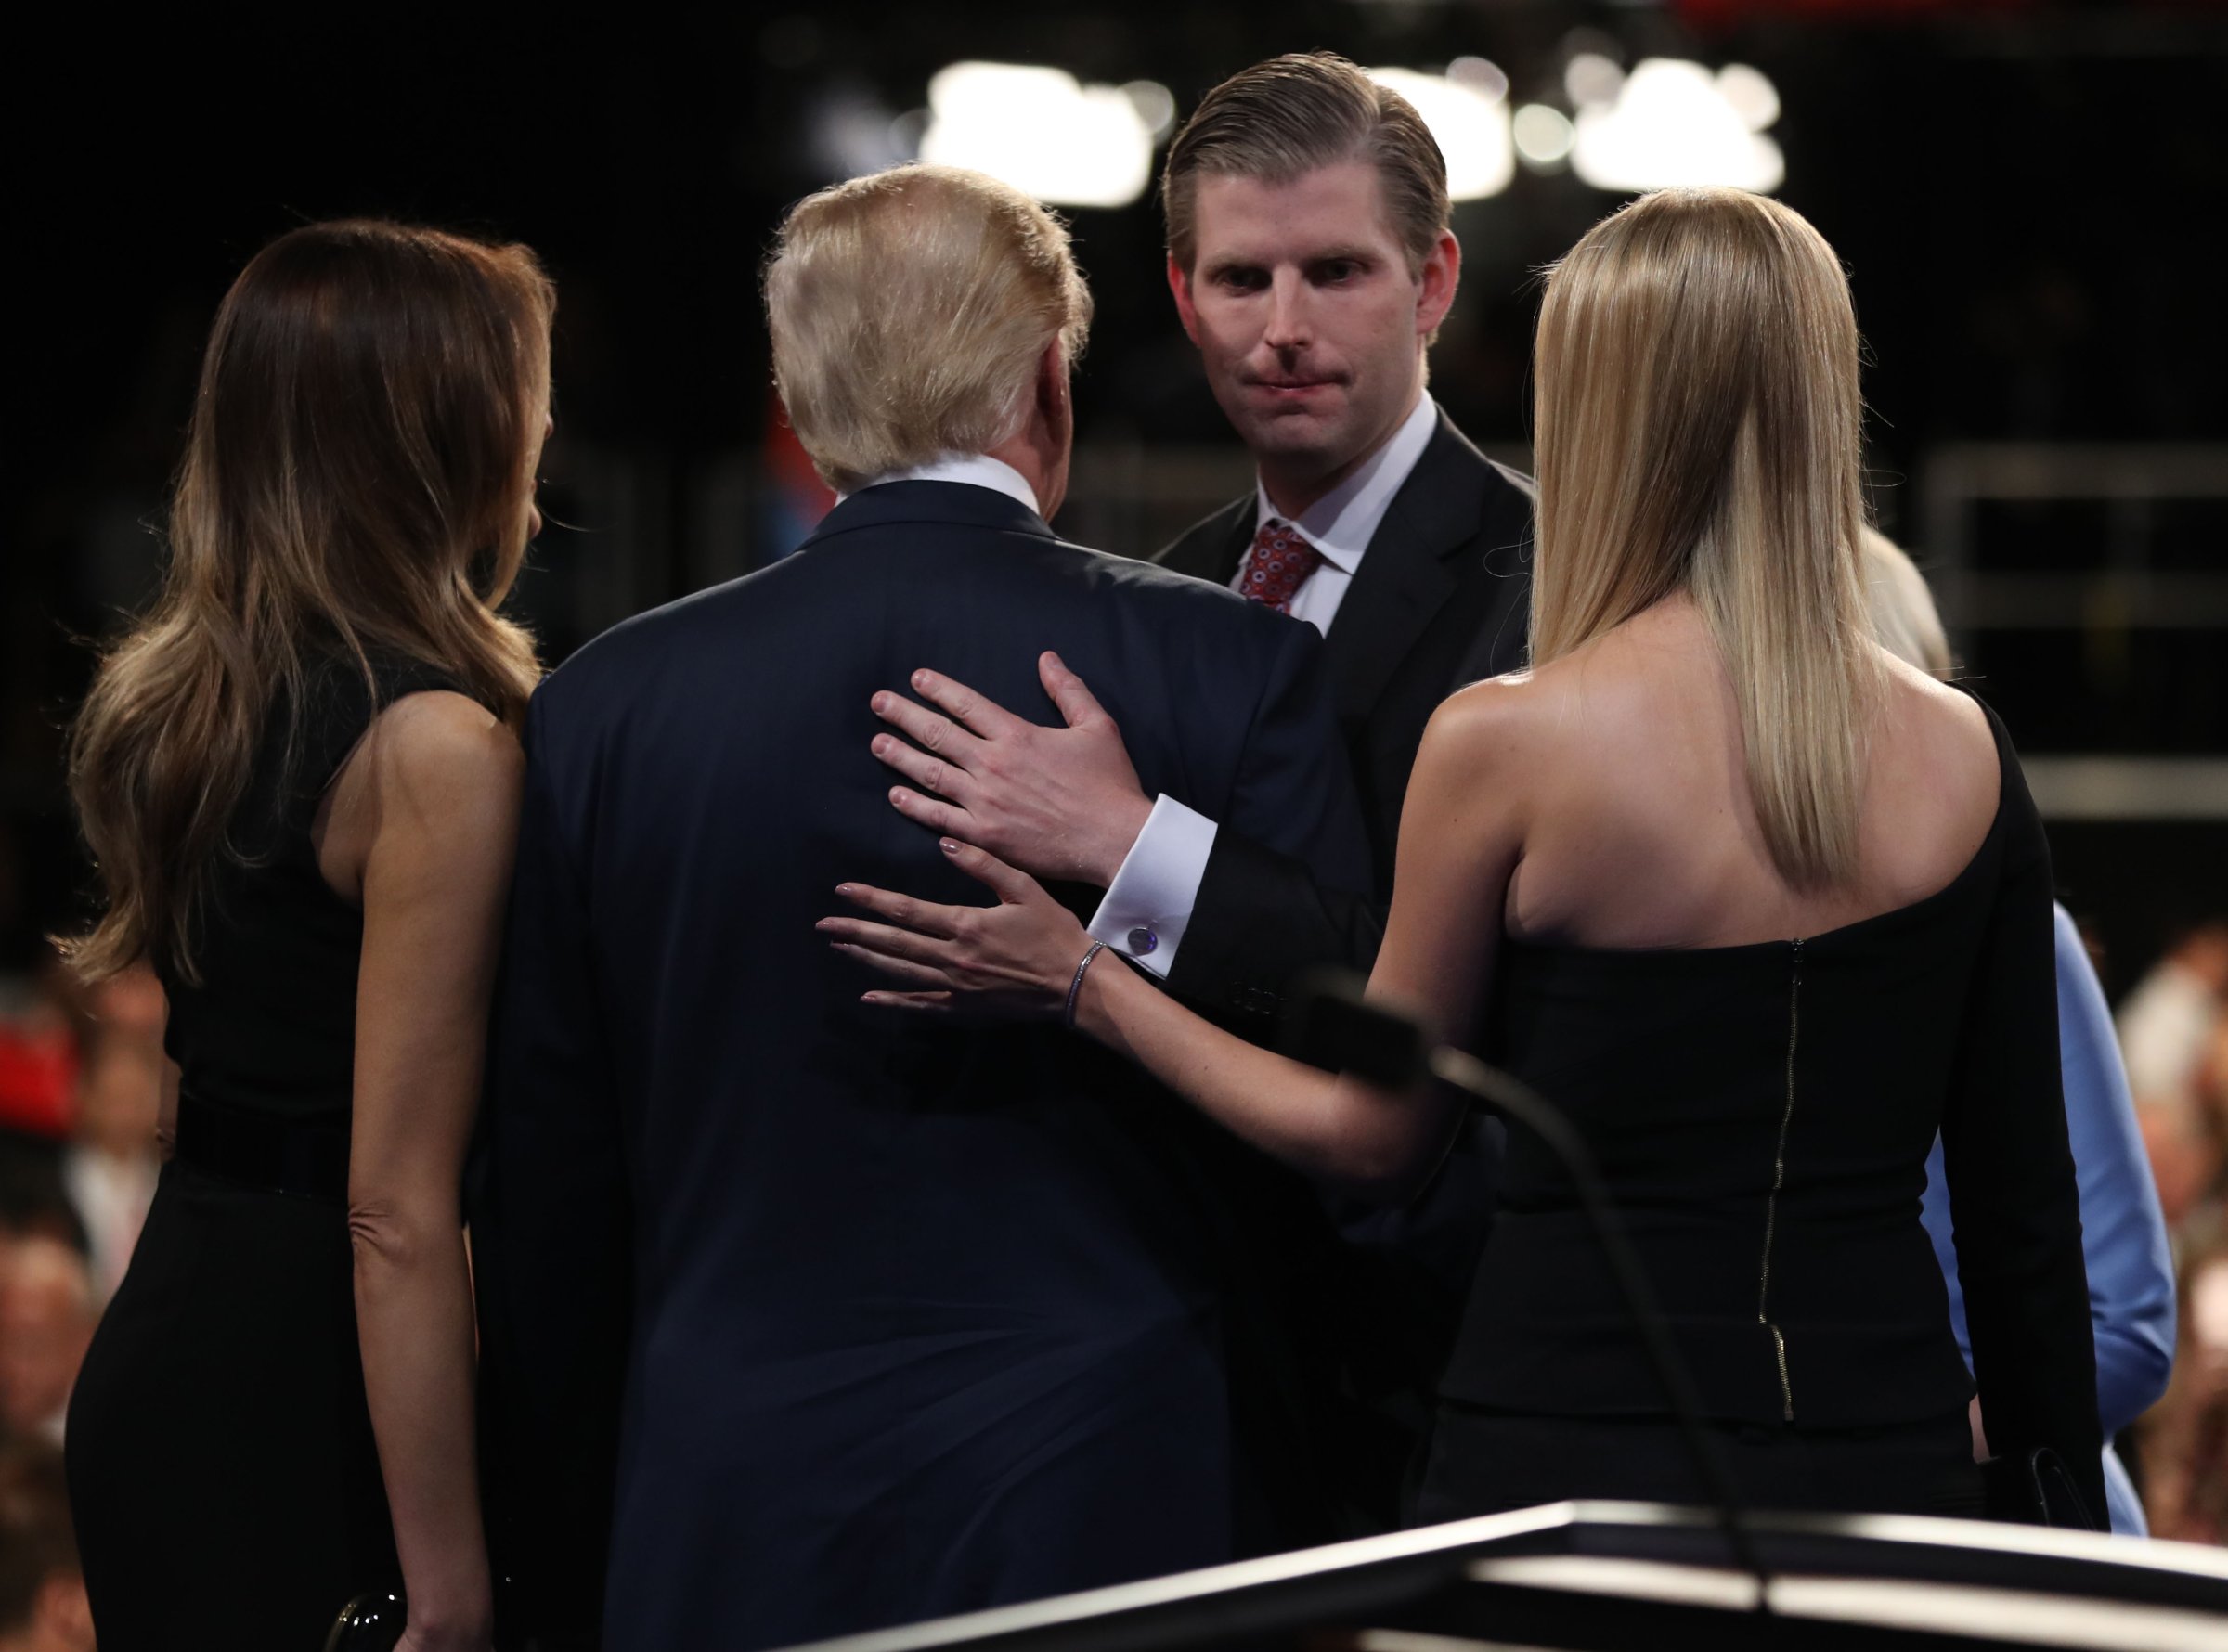 Donald Trump is cheered by his son Donald Trump Jr. at the end of the final presidential debate at the Thomas Mack Center on the campus of the University of Las Vegas, Oct. 19, 2016.